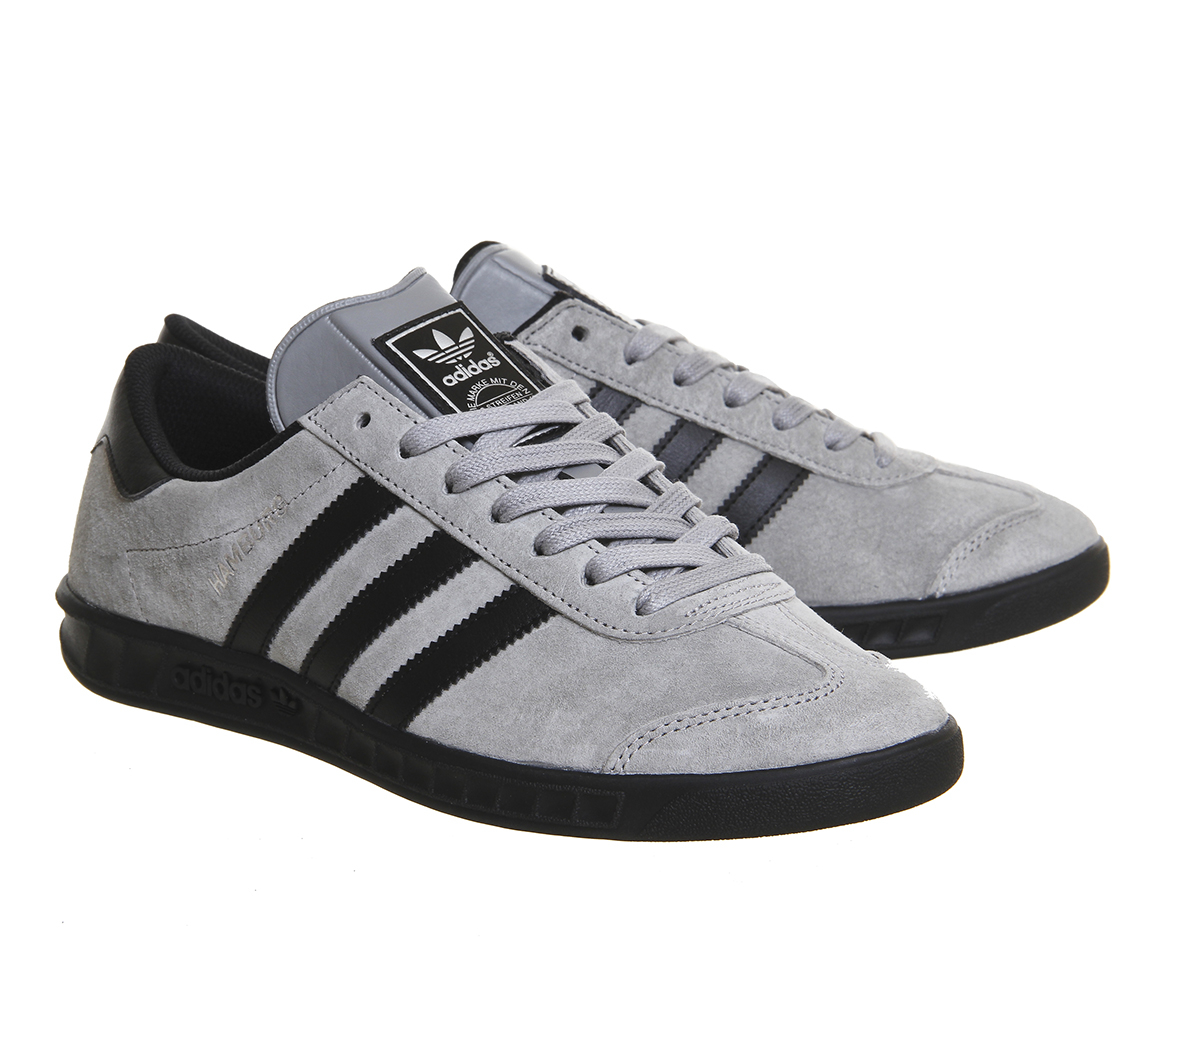 Lyst - Adidas Originals Hamburg Suede and Leather Low-Top Sneakers in ...